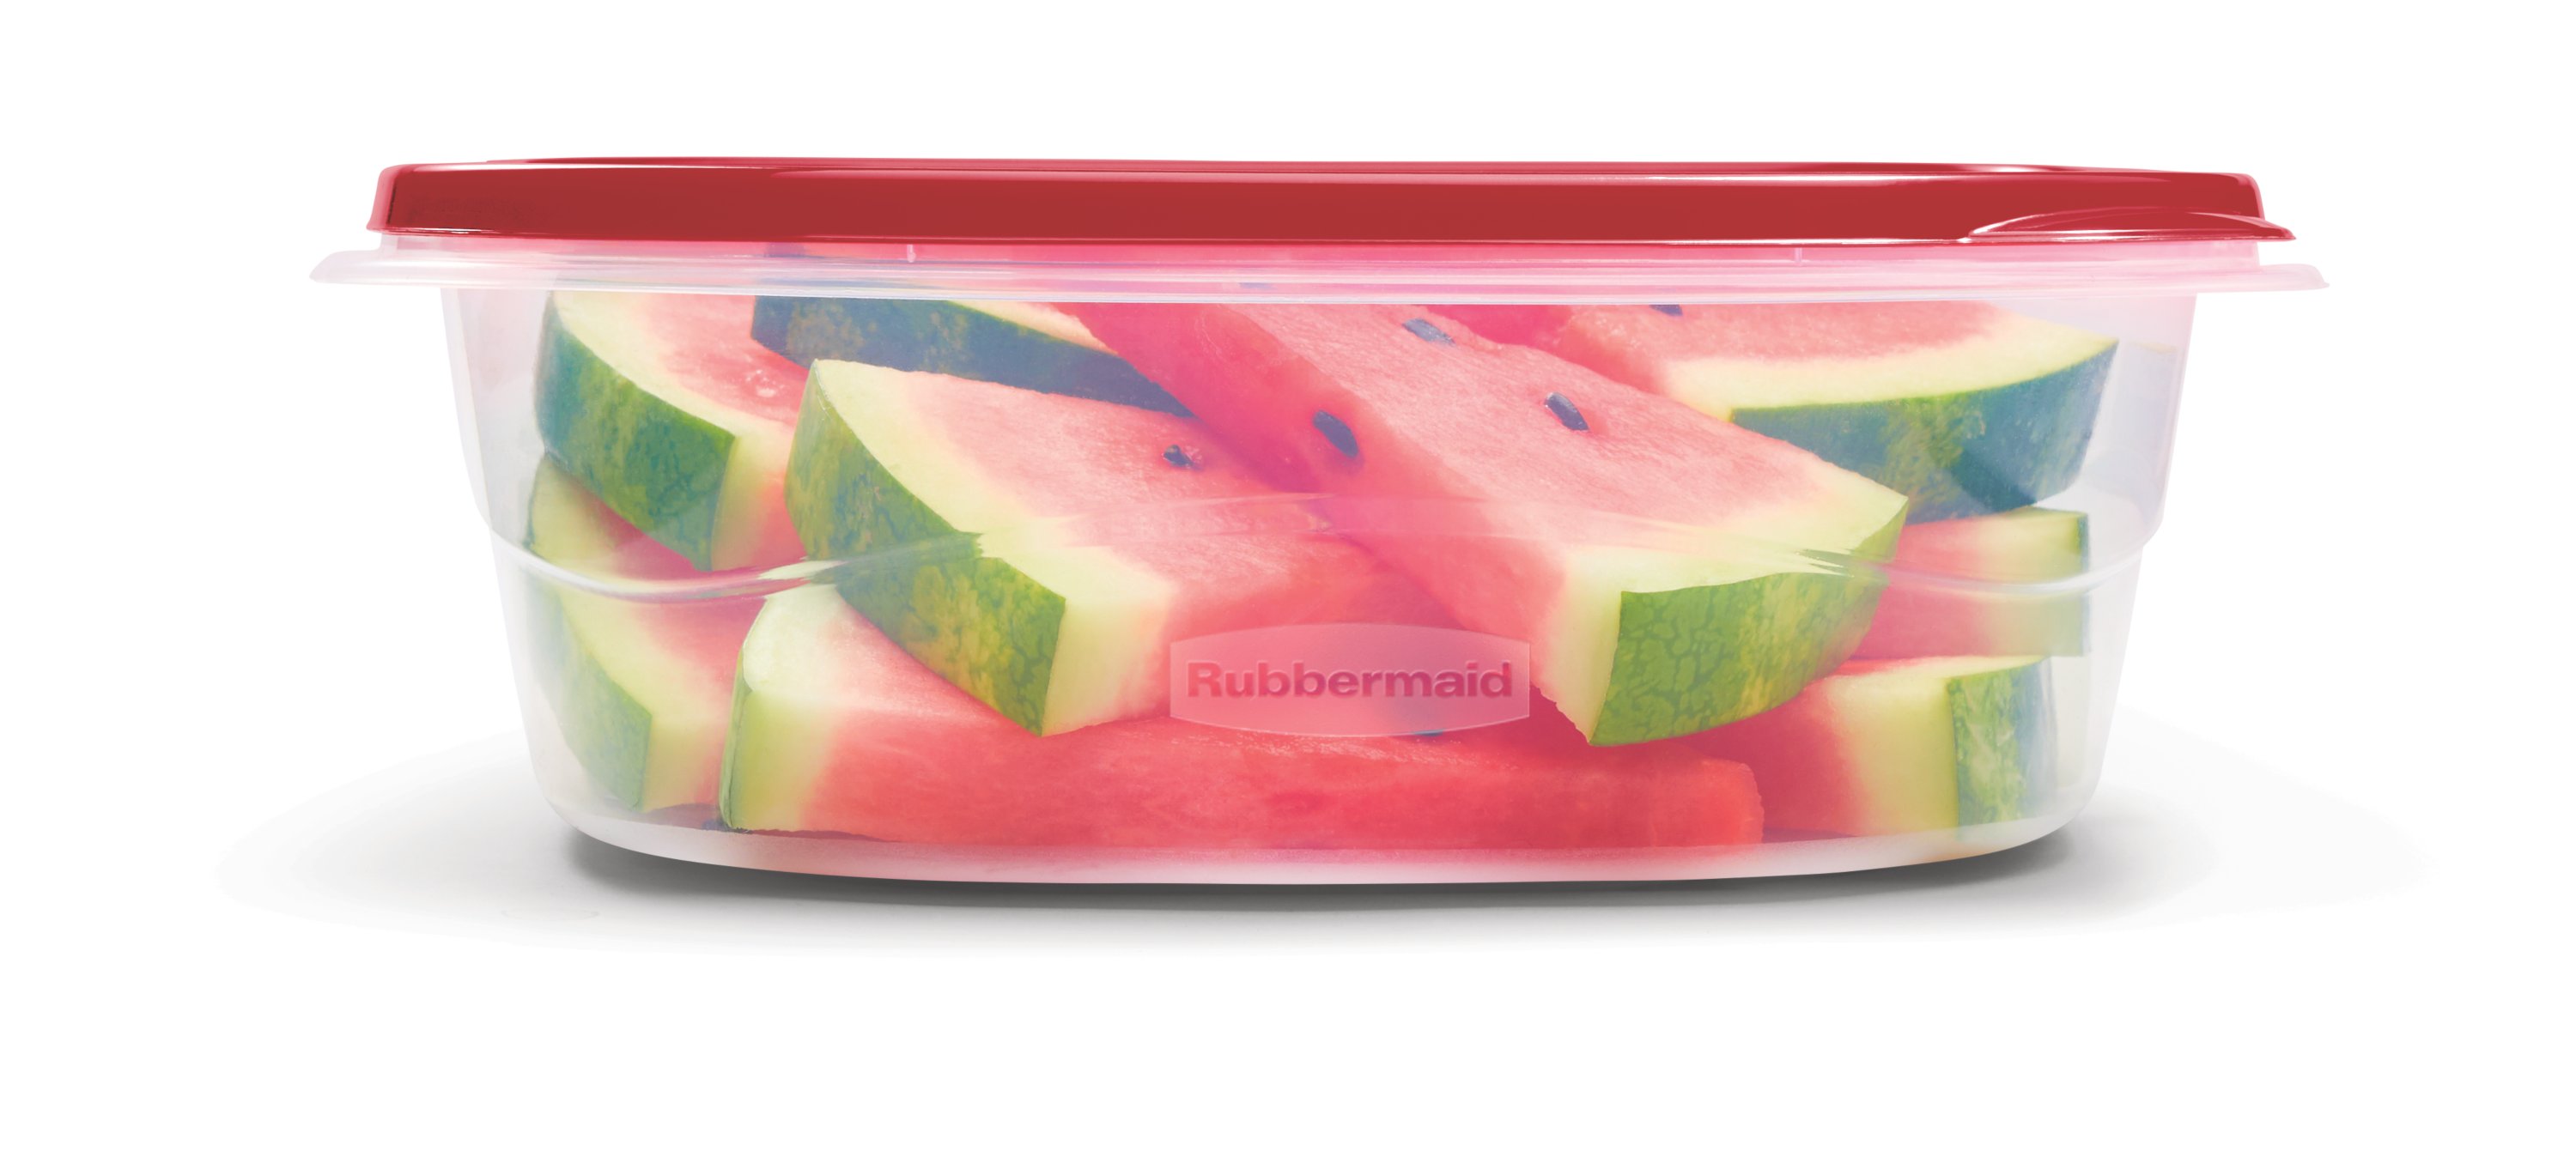 https://s7d9.scene7.com/is/image/NewellRubbermaid/2075790-rubbermaid-food-storage-takealongs-small-square-1.2c-with-lid-watermelon-straight-on